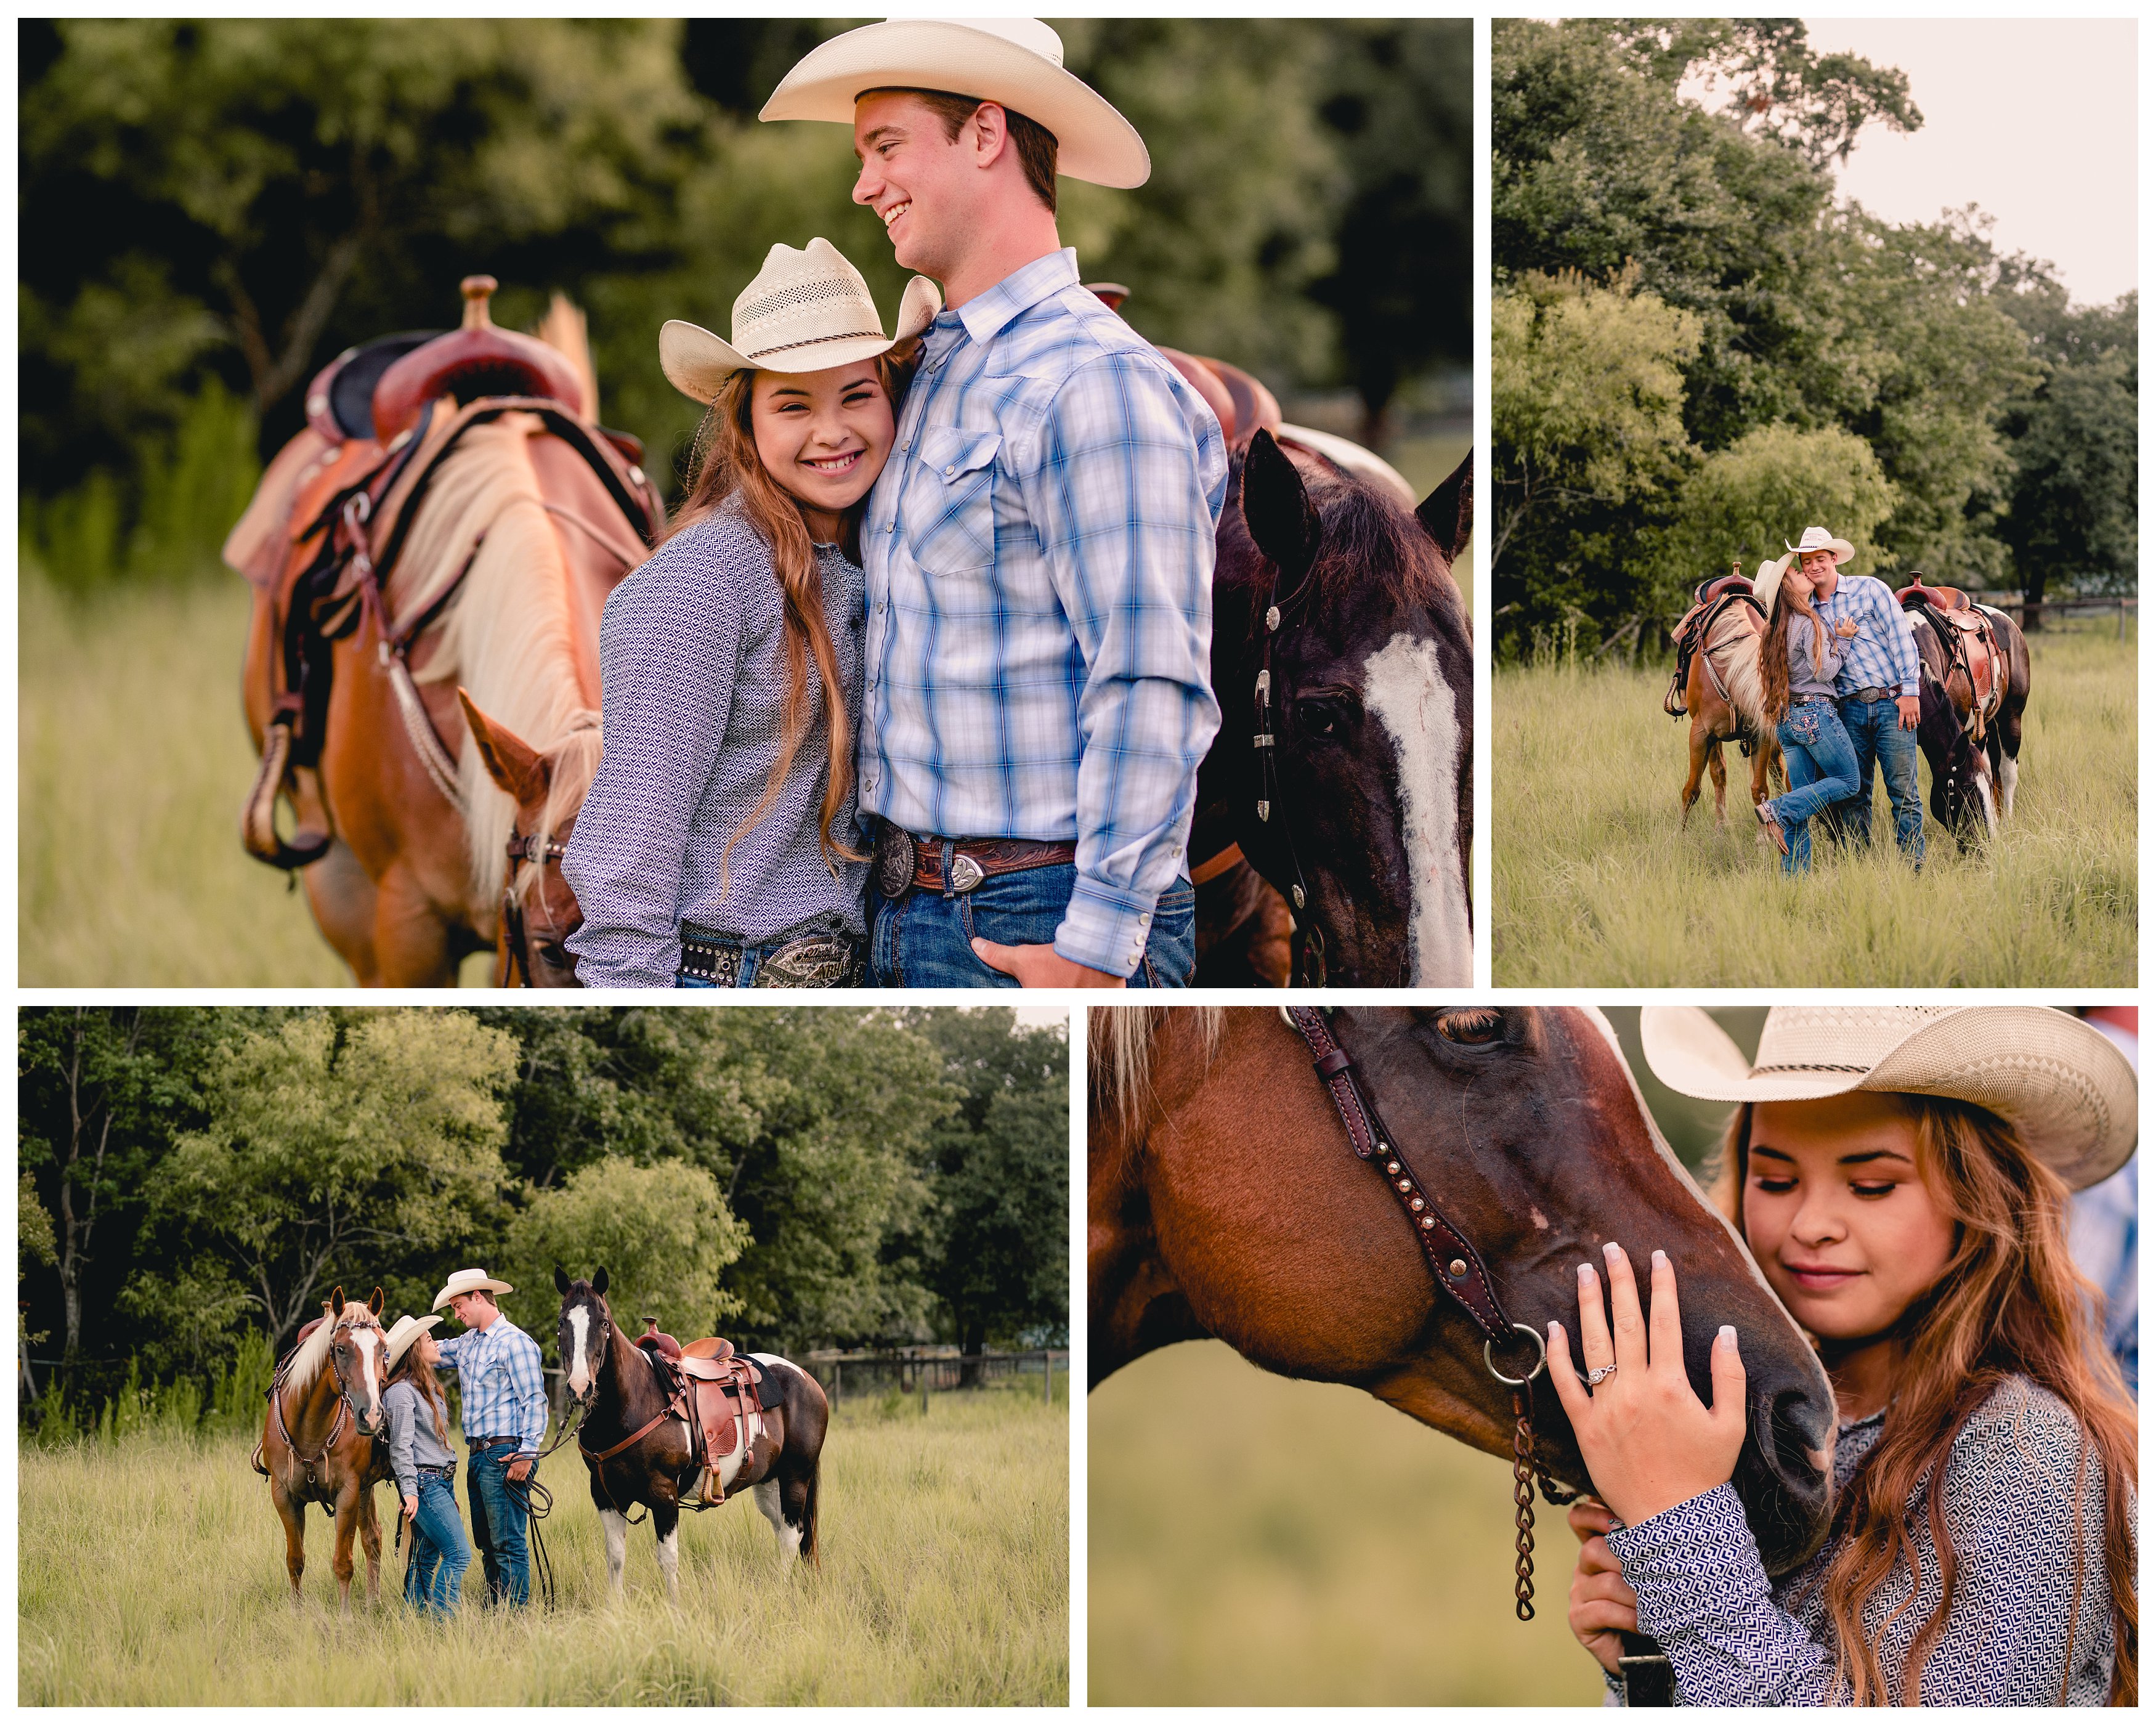 Engagement session for cowboy and cowgirl in Jacksonville, FL with their two horses.